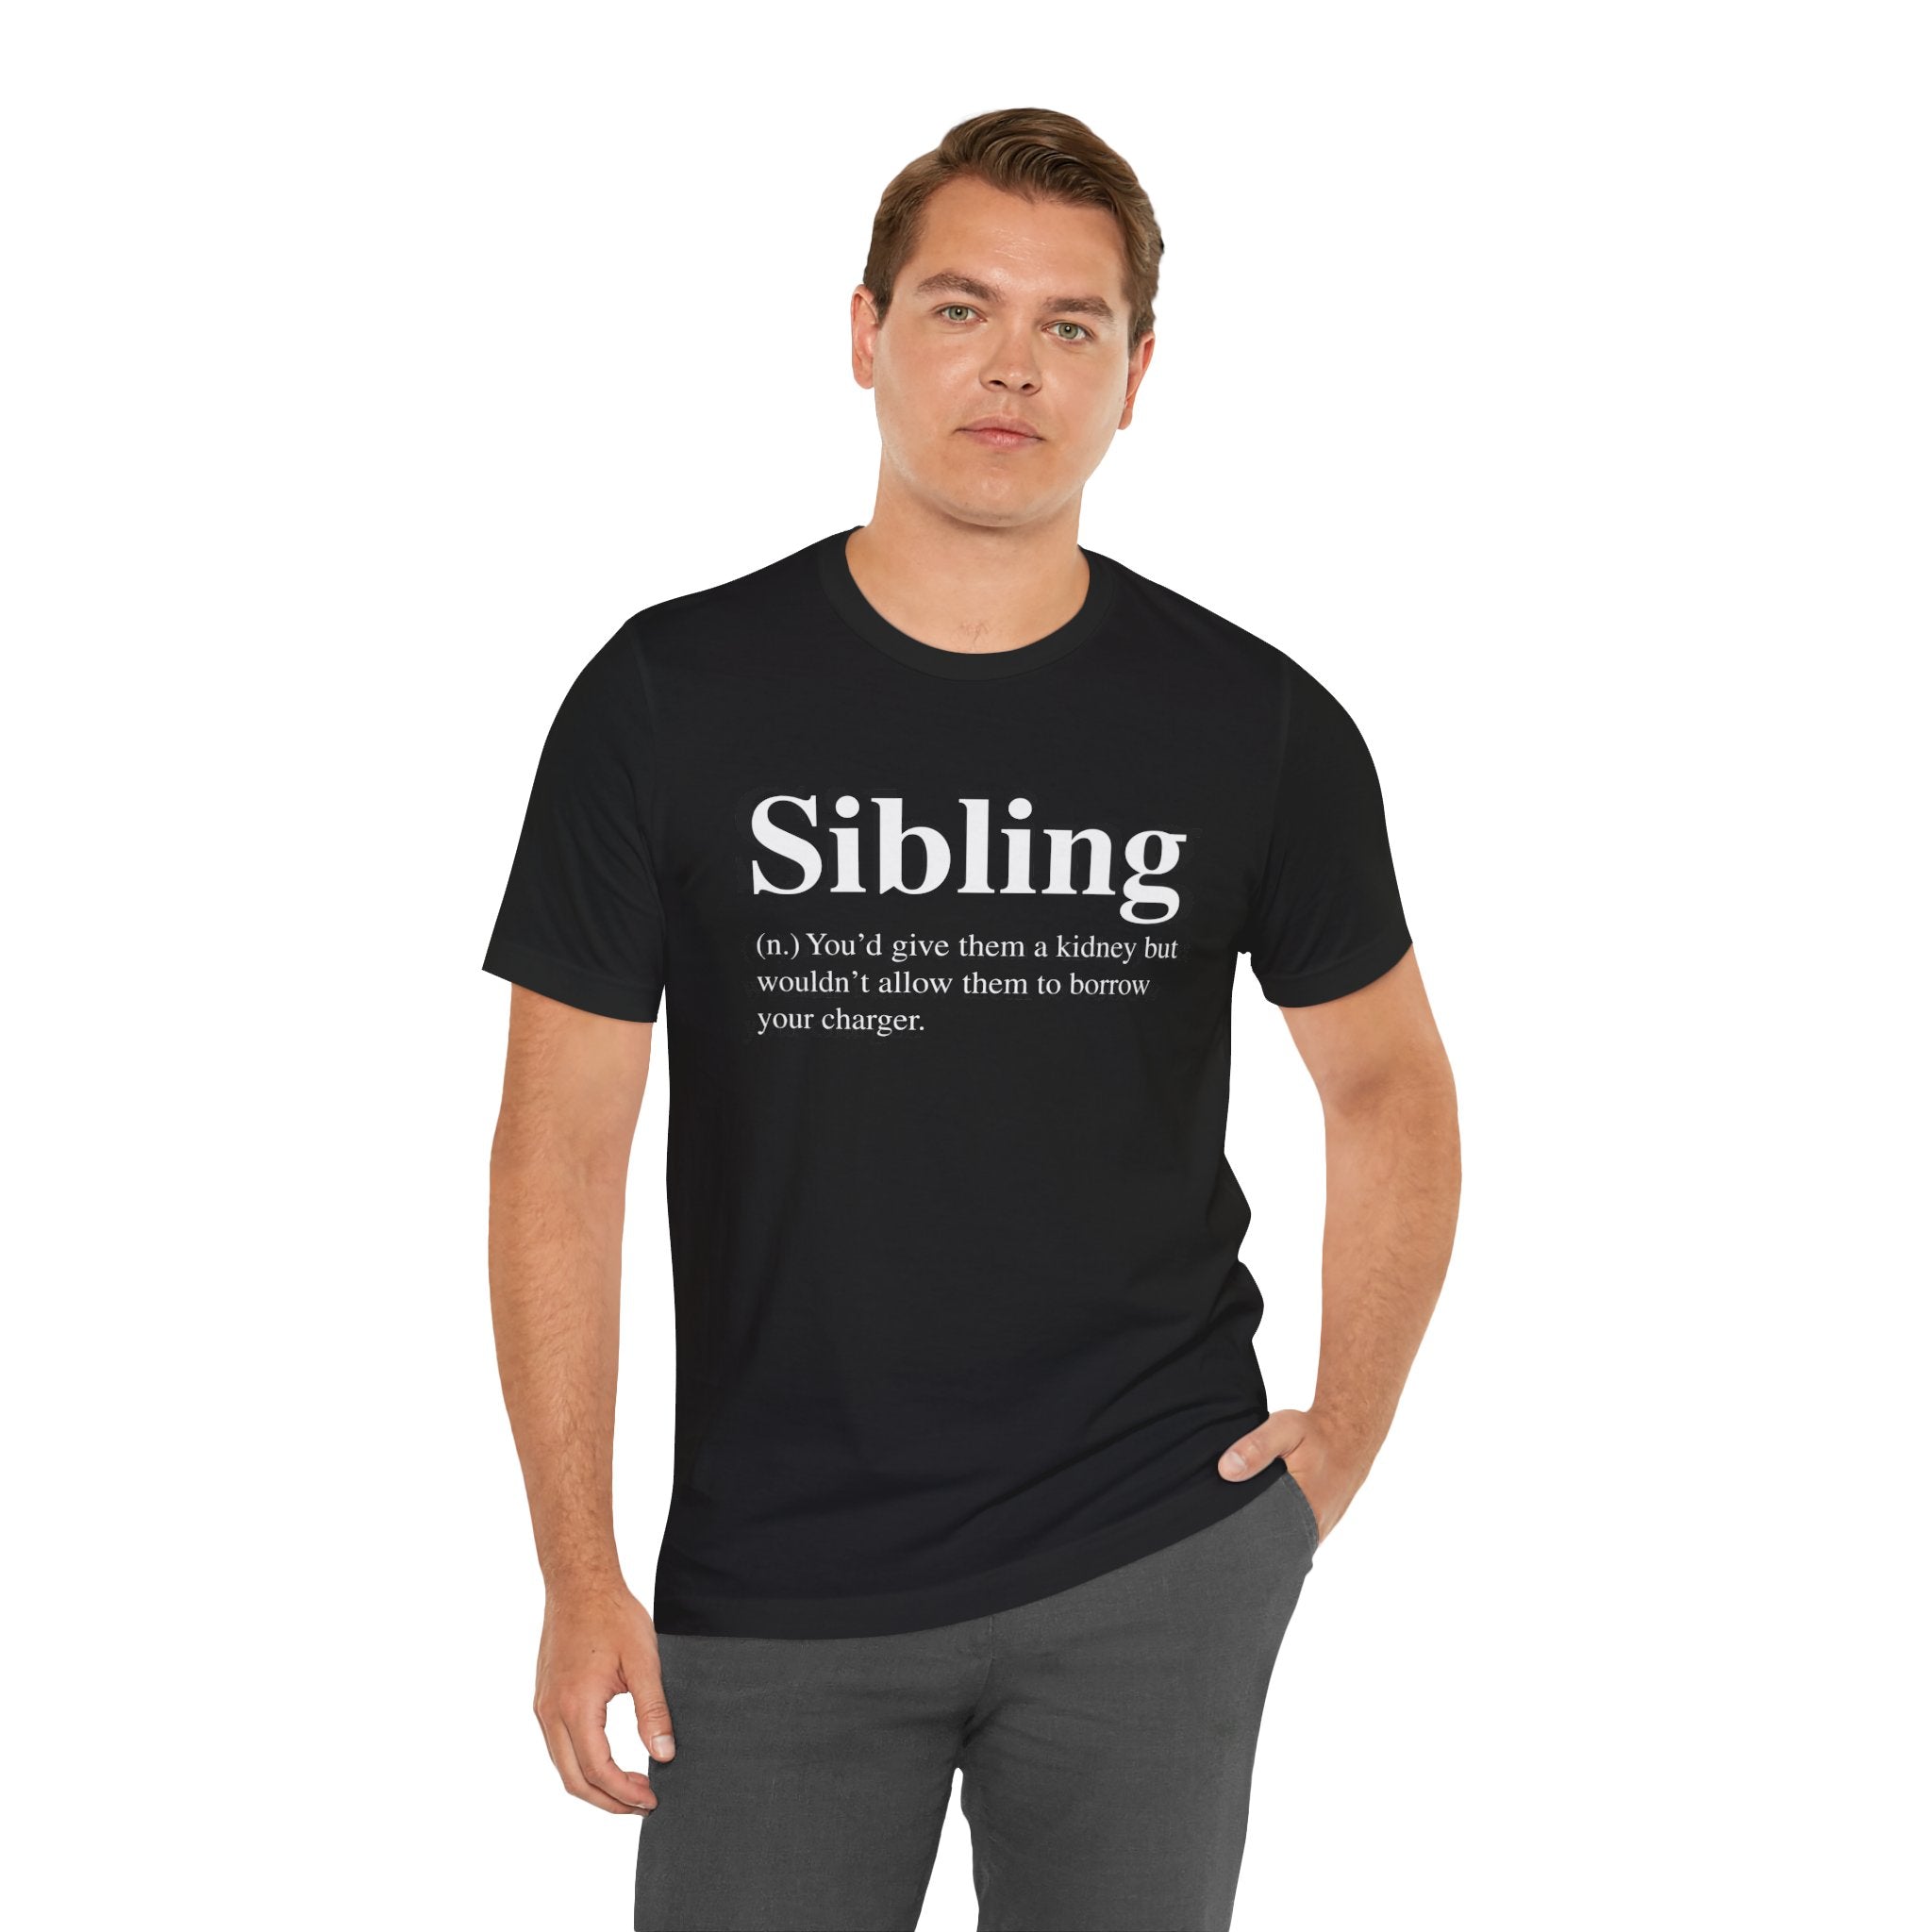 Man wearing a Soft cotton Black Sibling T-Shirt with the text "siblings" and a humorous quote about sharing a kidney but not a charger.